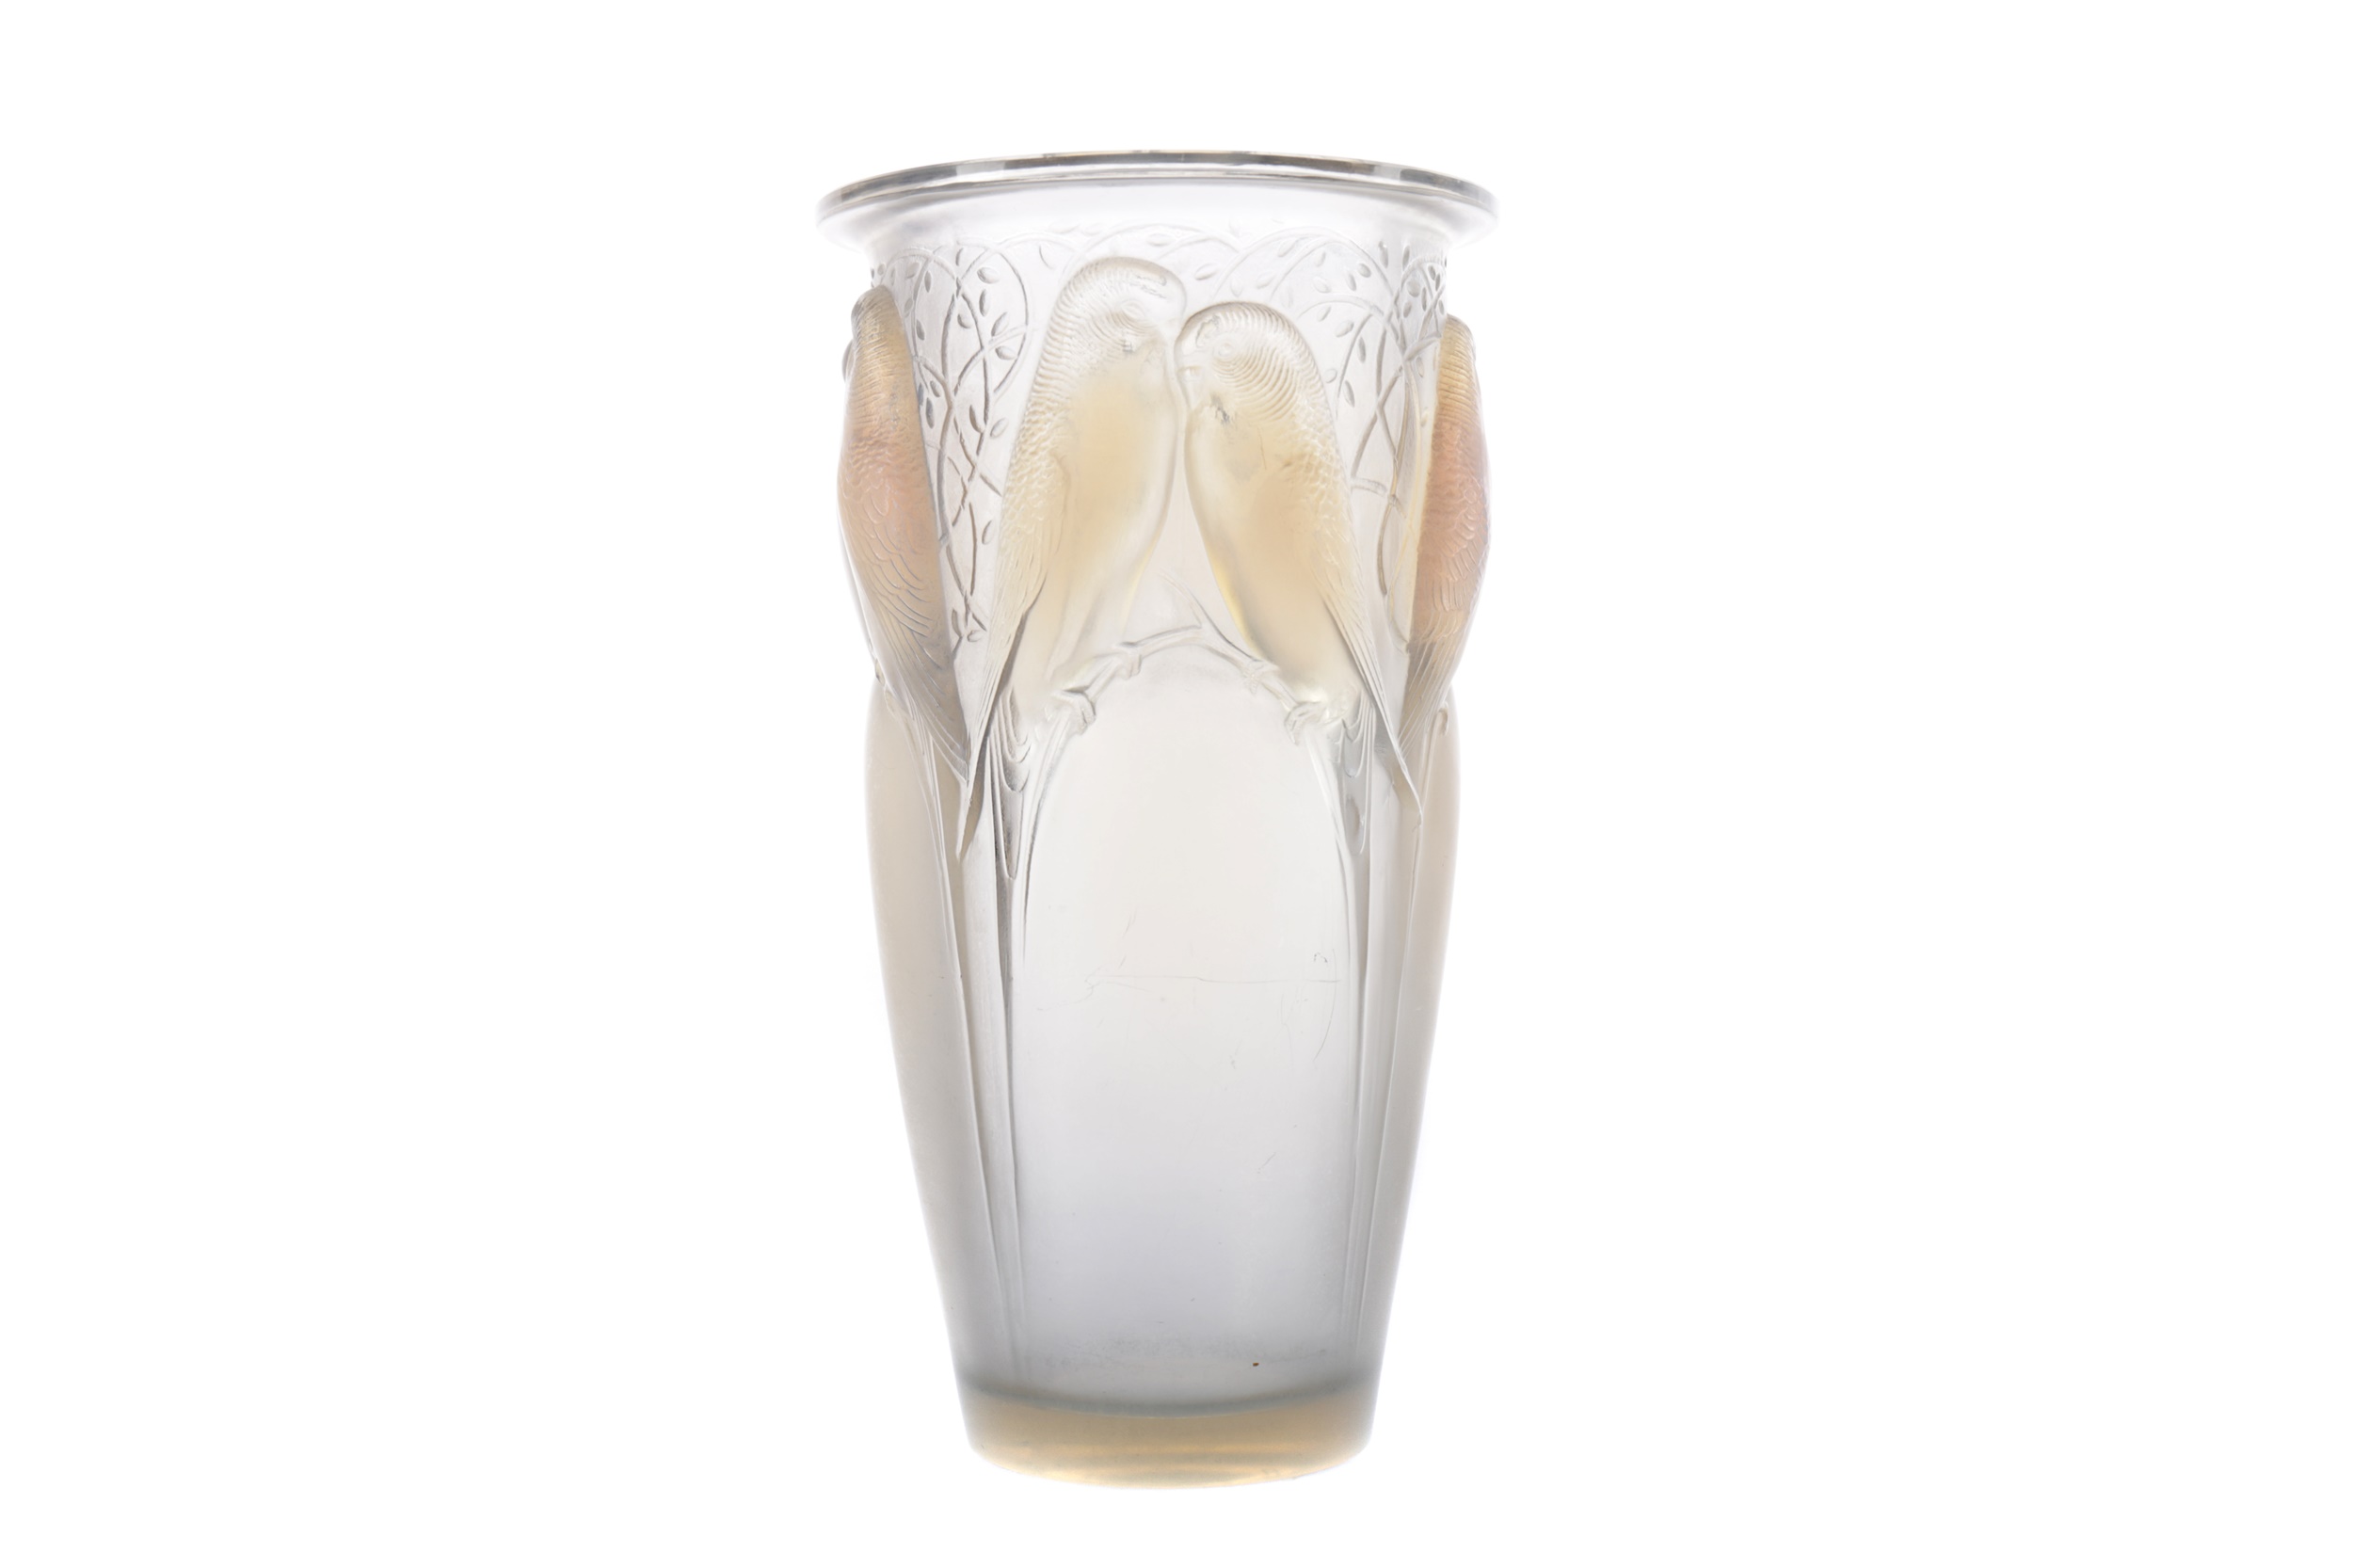 A LALIQUE 'CEYLAN' PATTERN OPALESCENT GLASS VASE - Image 2 of 3